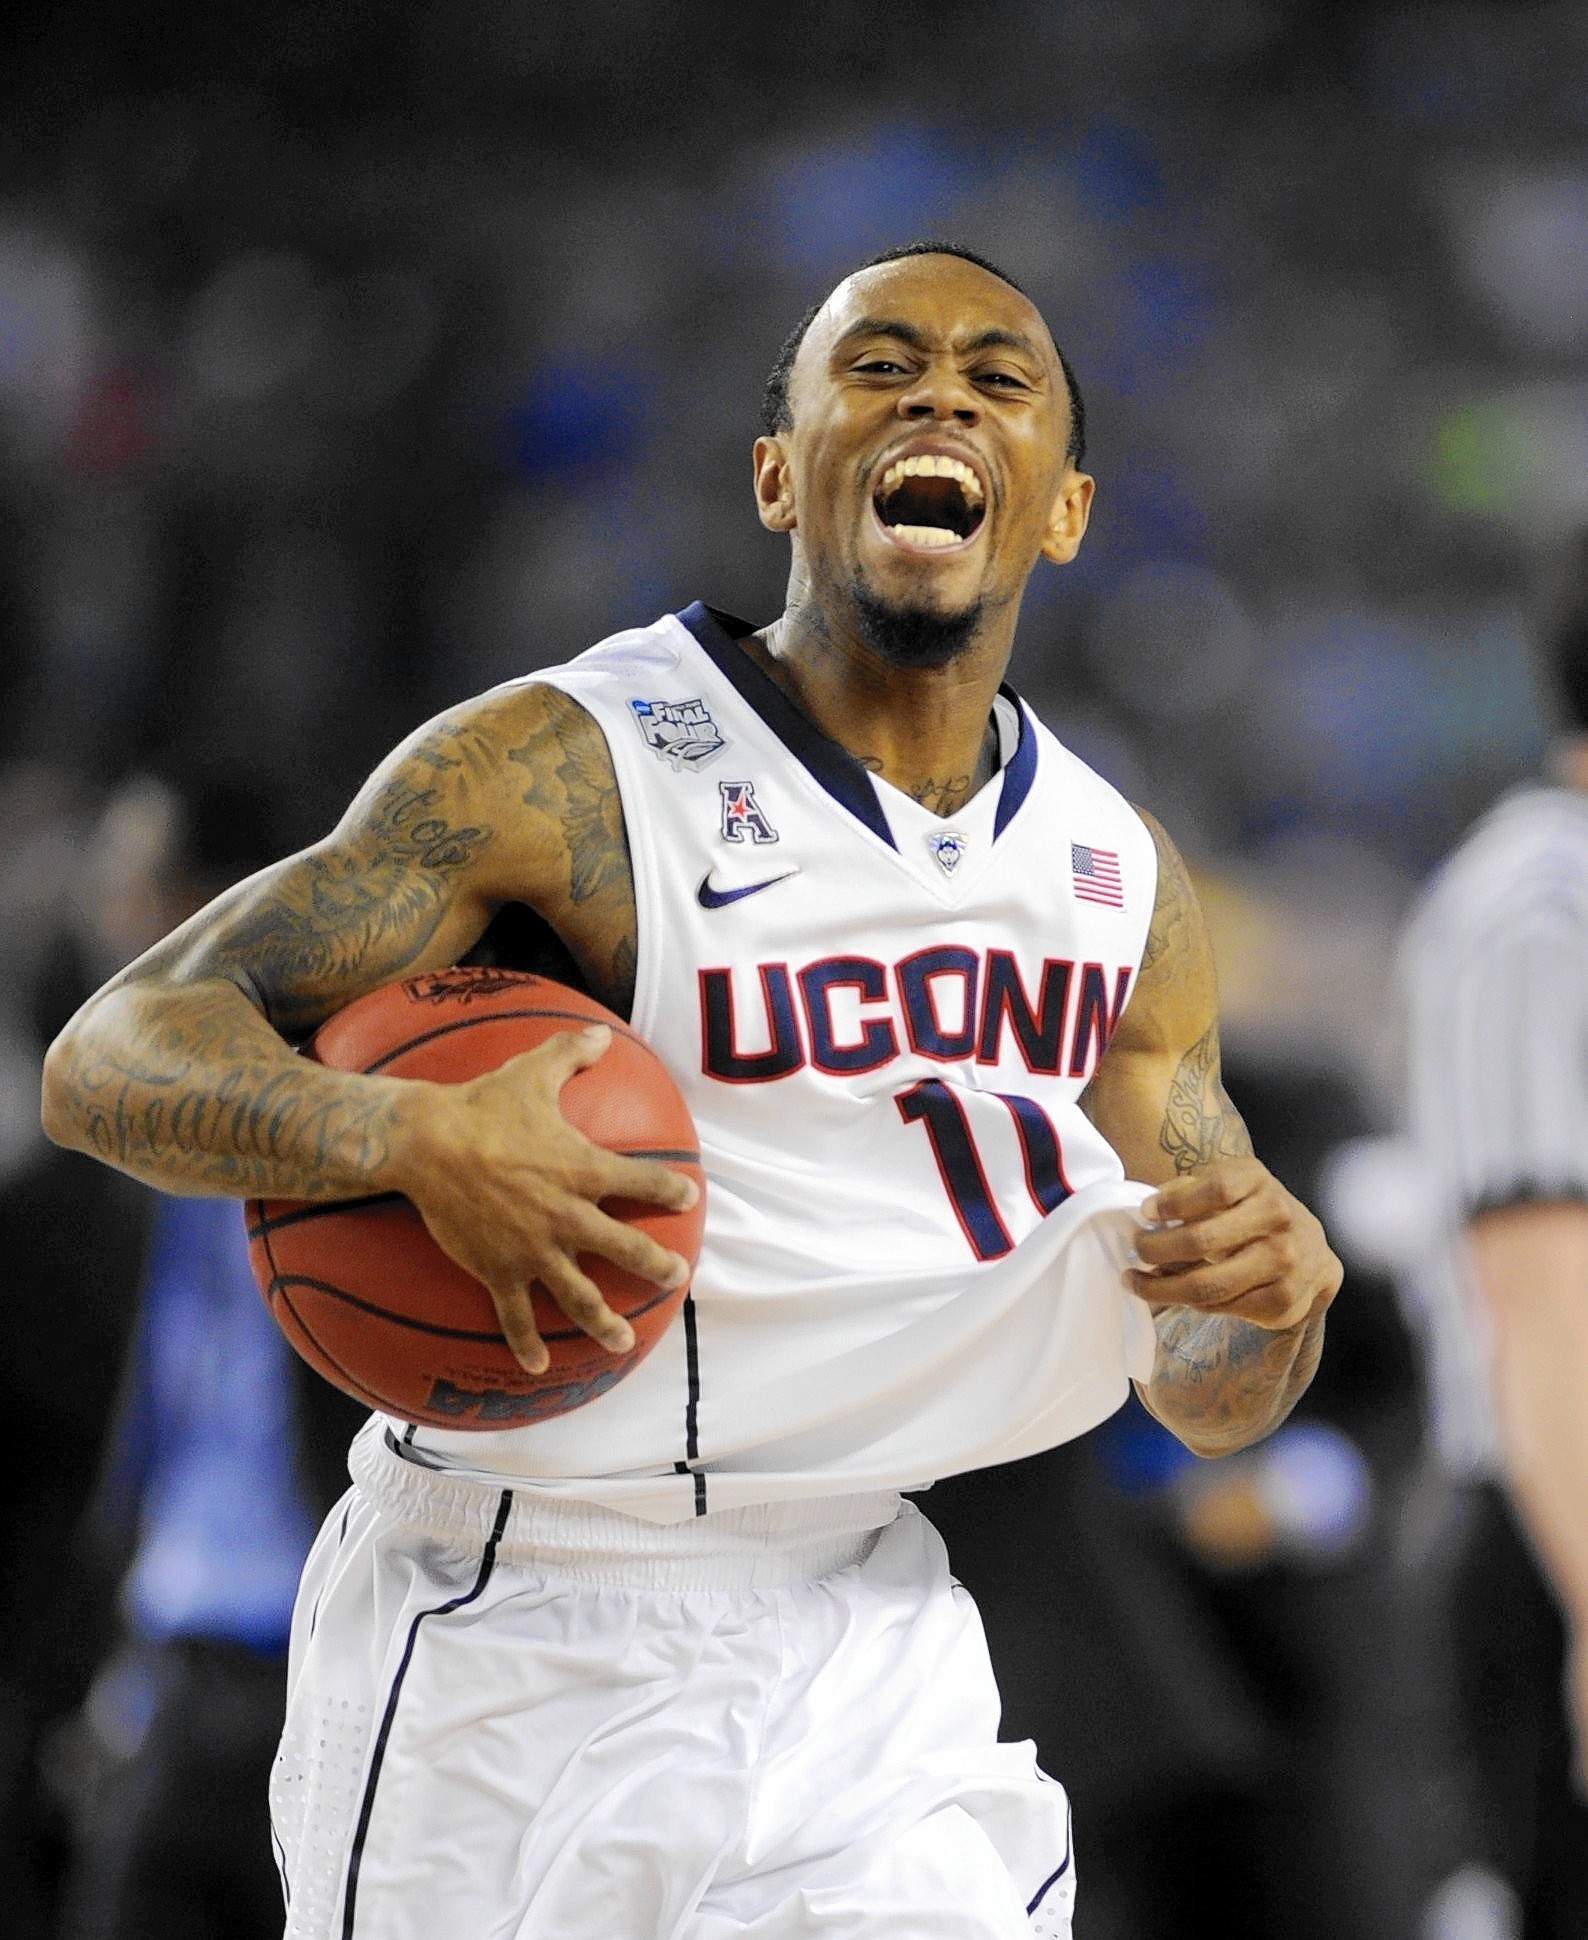 Ryan Boatright leaves NBA's D-League, signs to play in Italy - Aurora Beacon-News